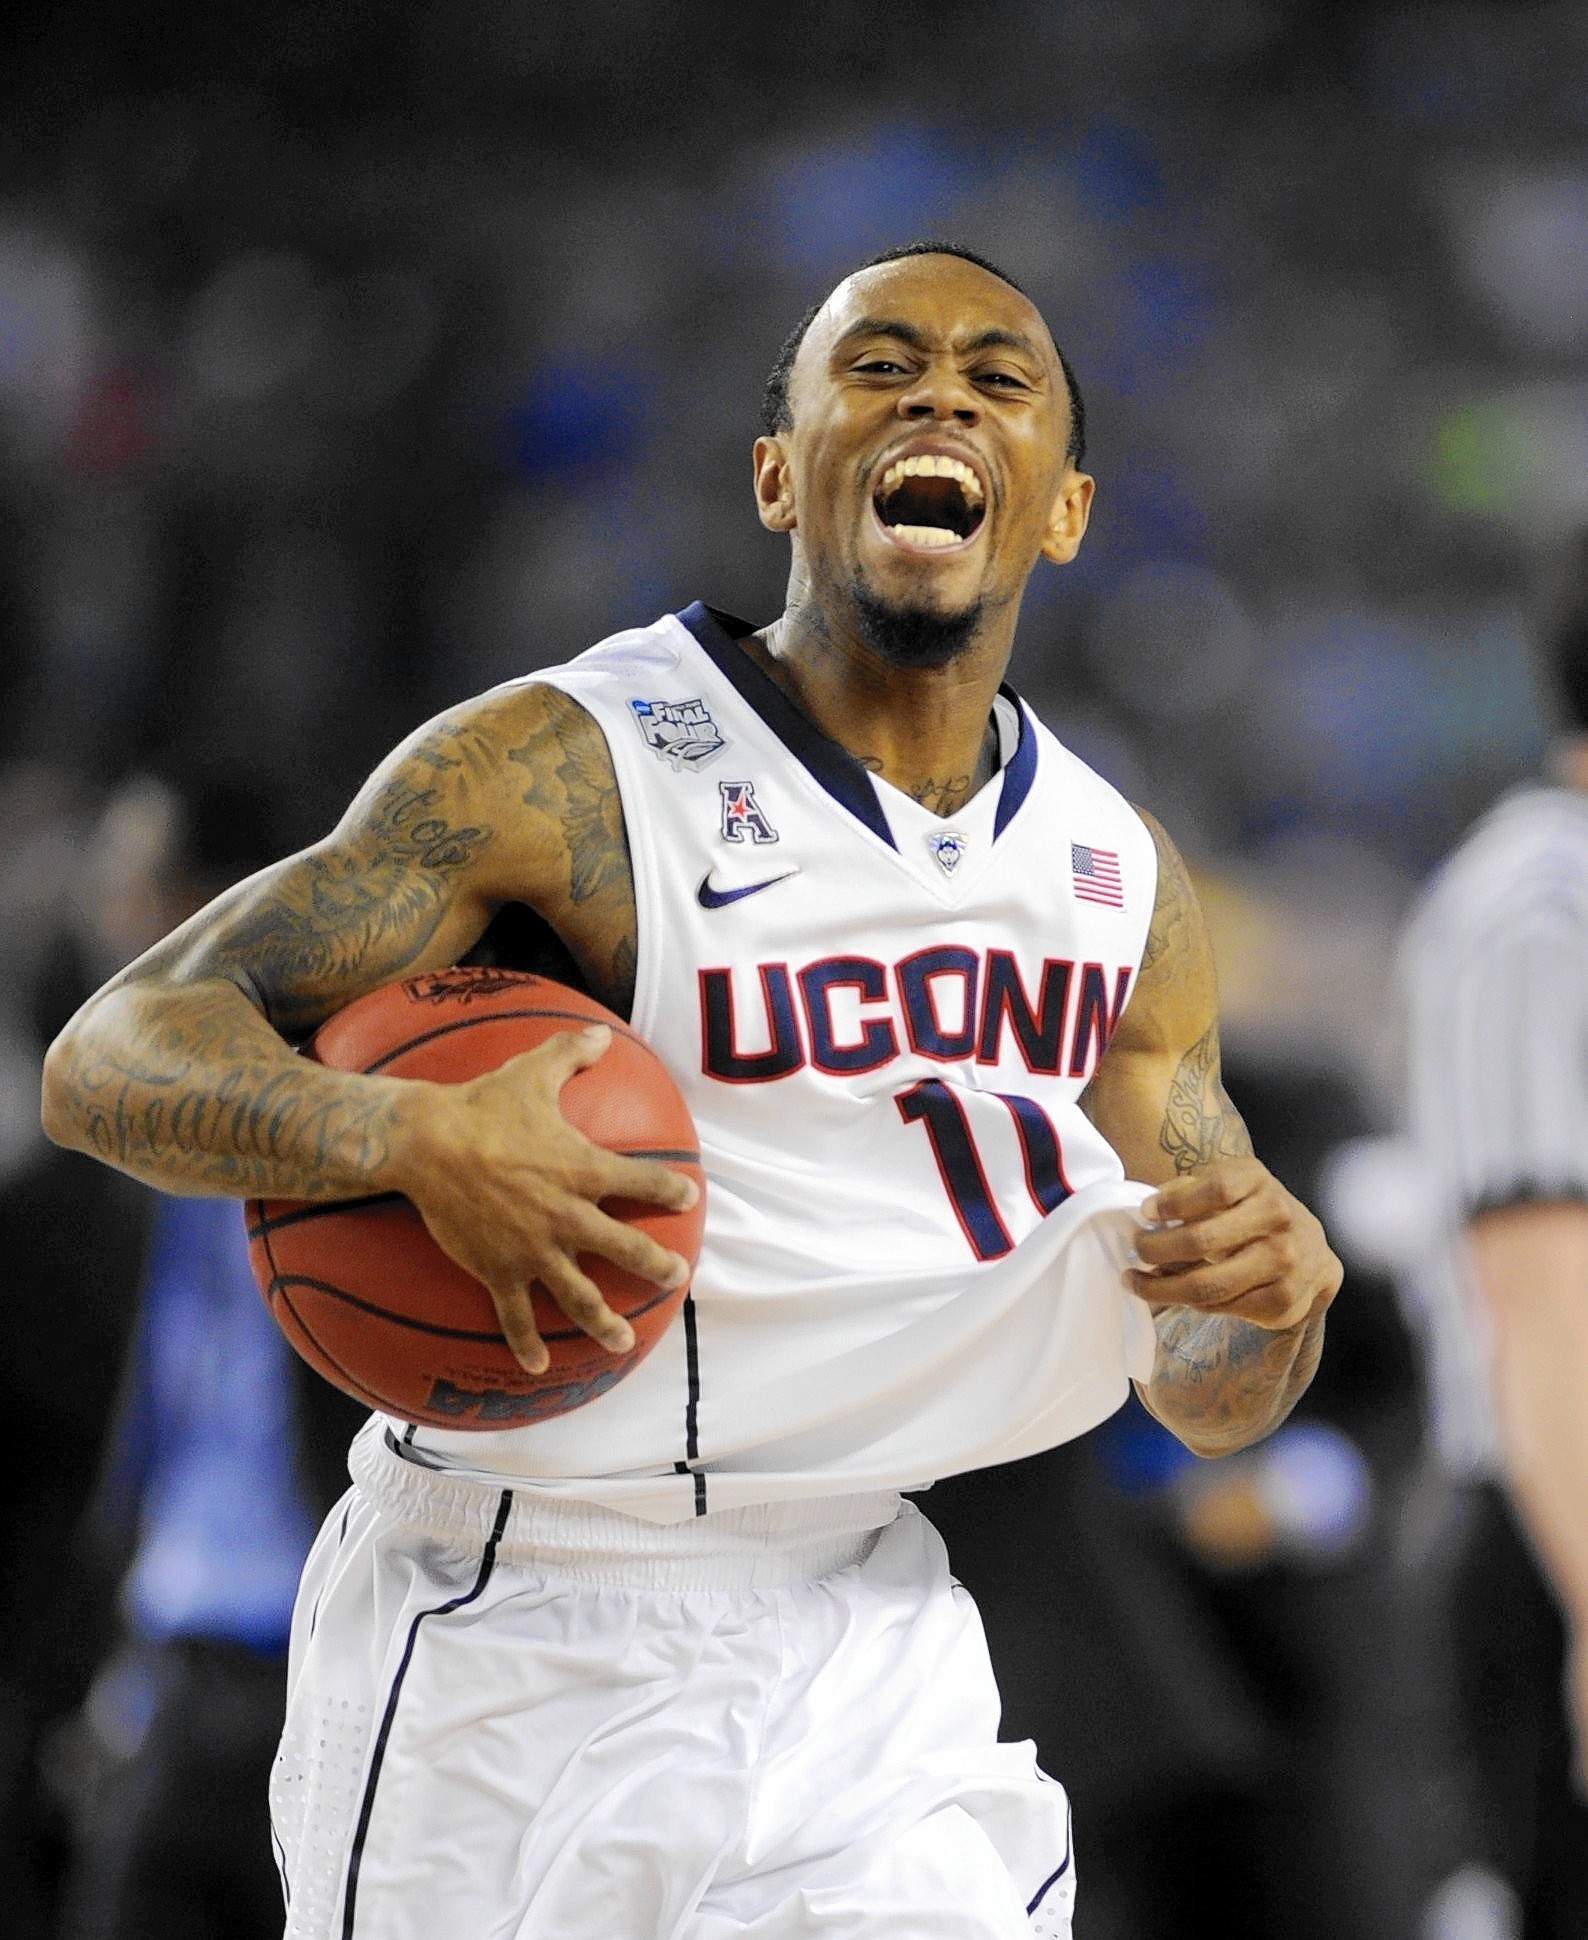 Ryan Boatright leaves NBA's D-League, signs to play in Italy - Aurora Beacon-News